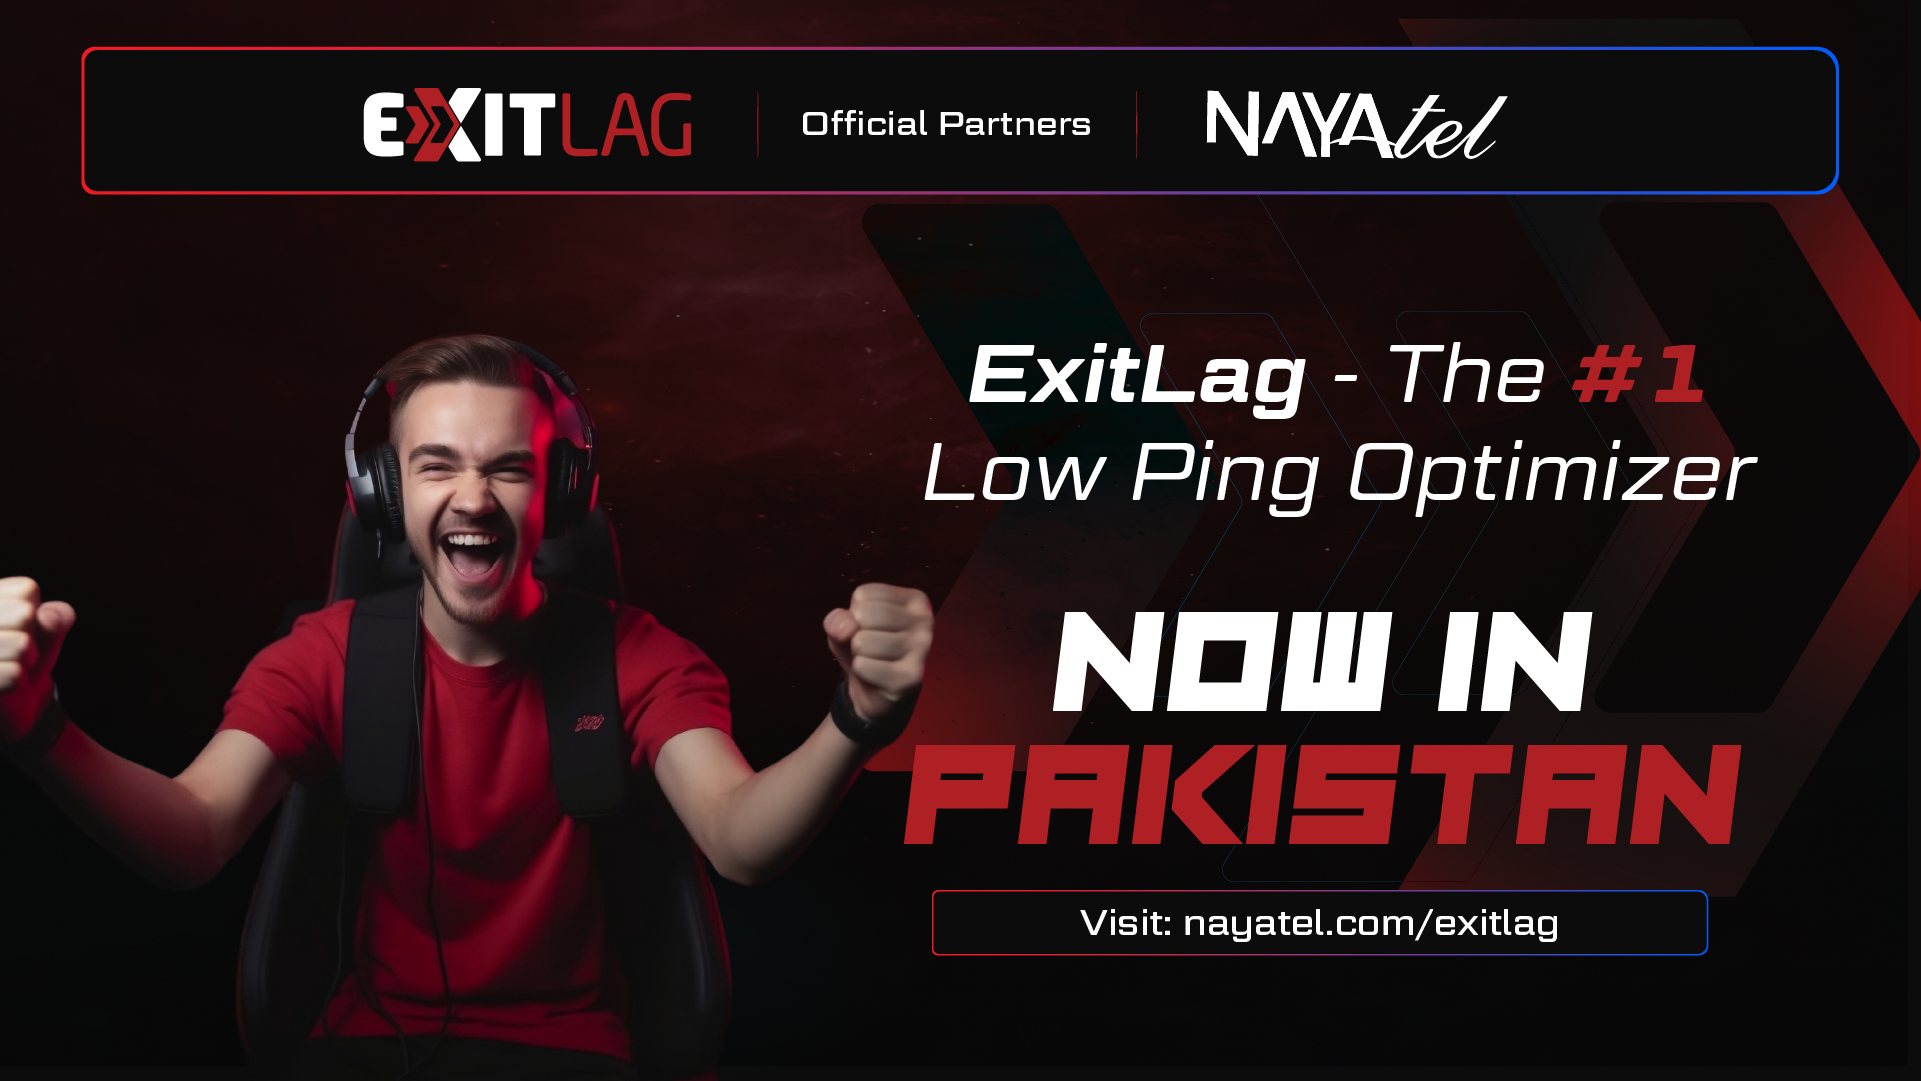 Nayatel Launches ExitLag in Pakistan - the Number 1 Low Ping Optimizer